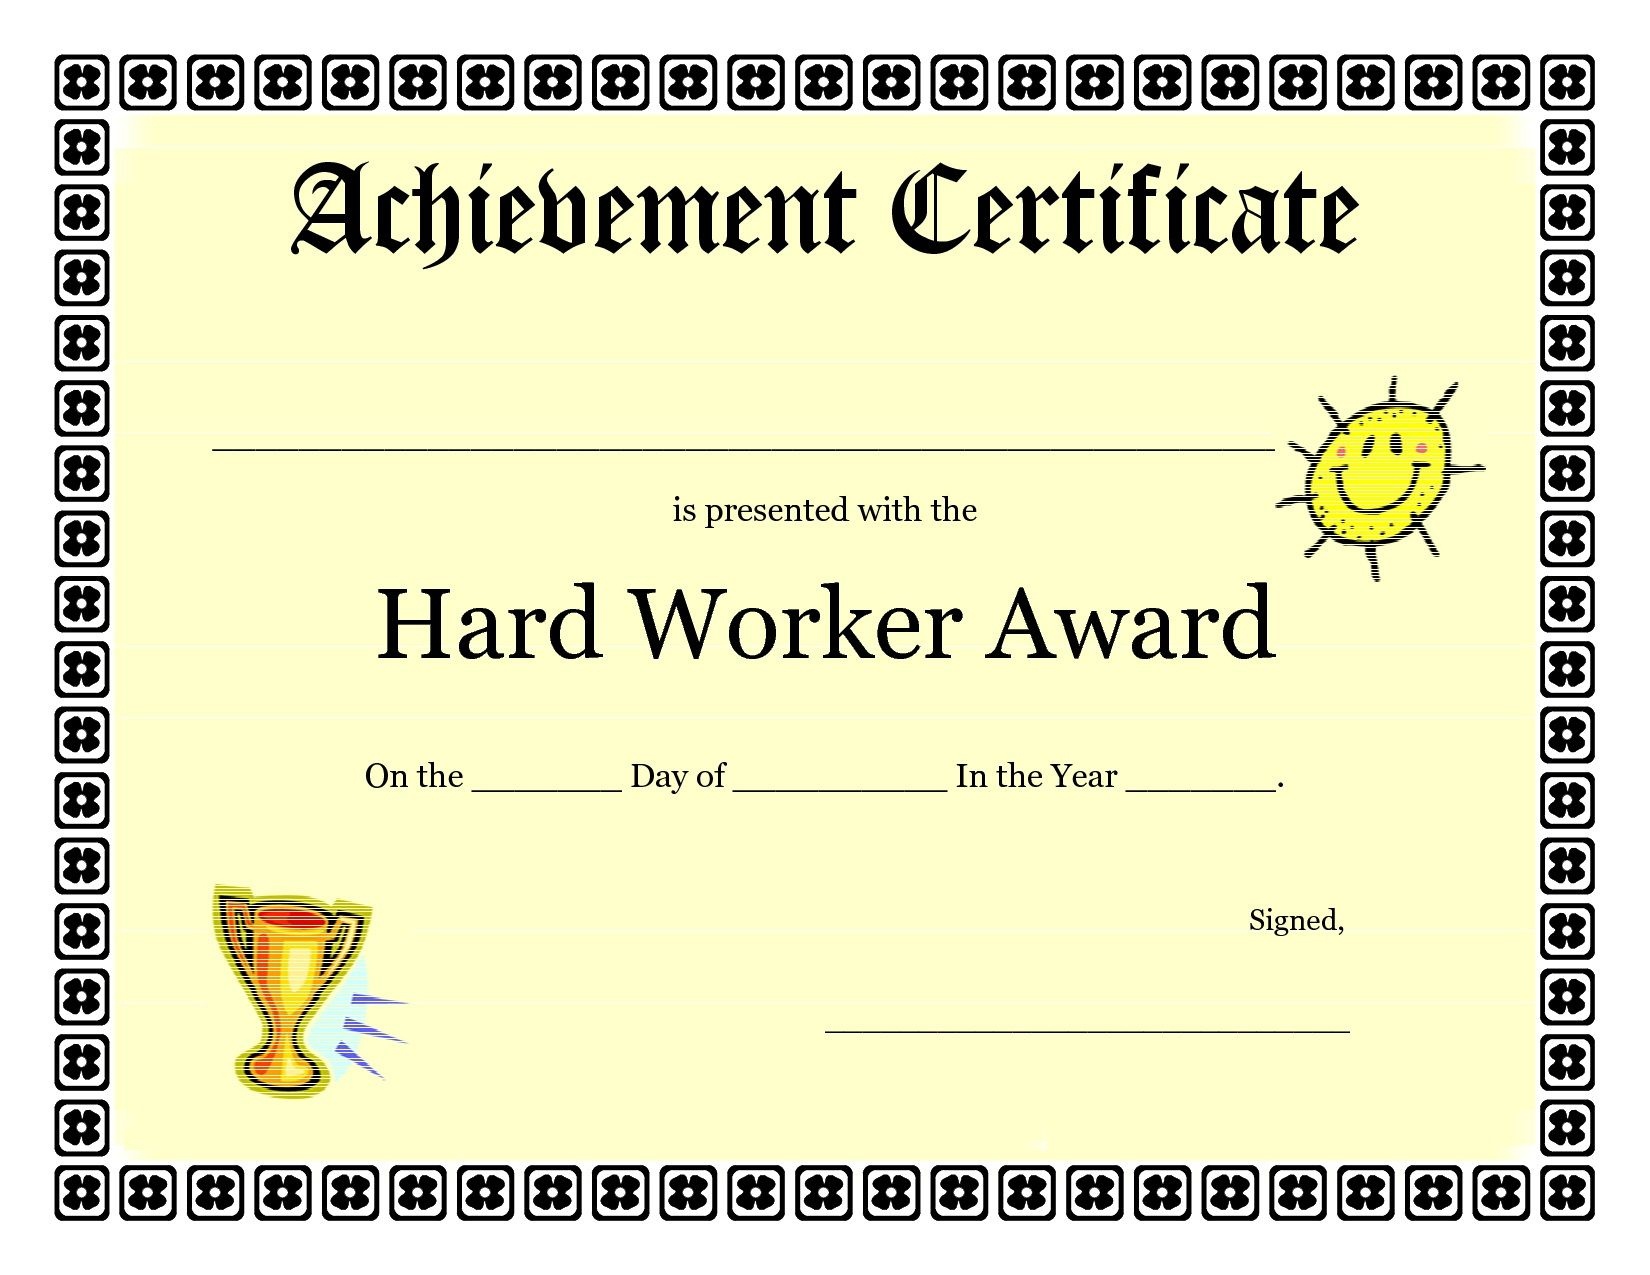 Free Printable Award Certificate Template | End Of Year - Free Printable Award Certificates